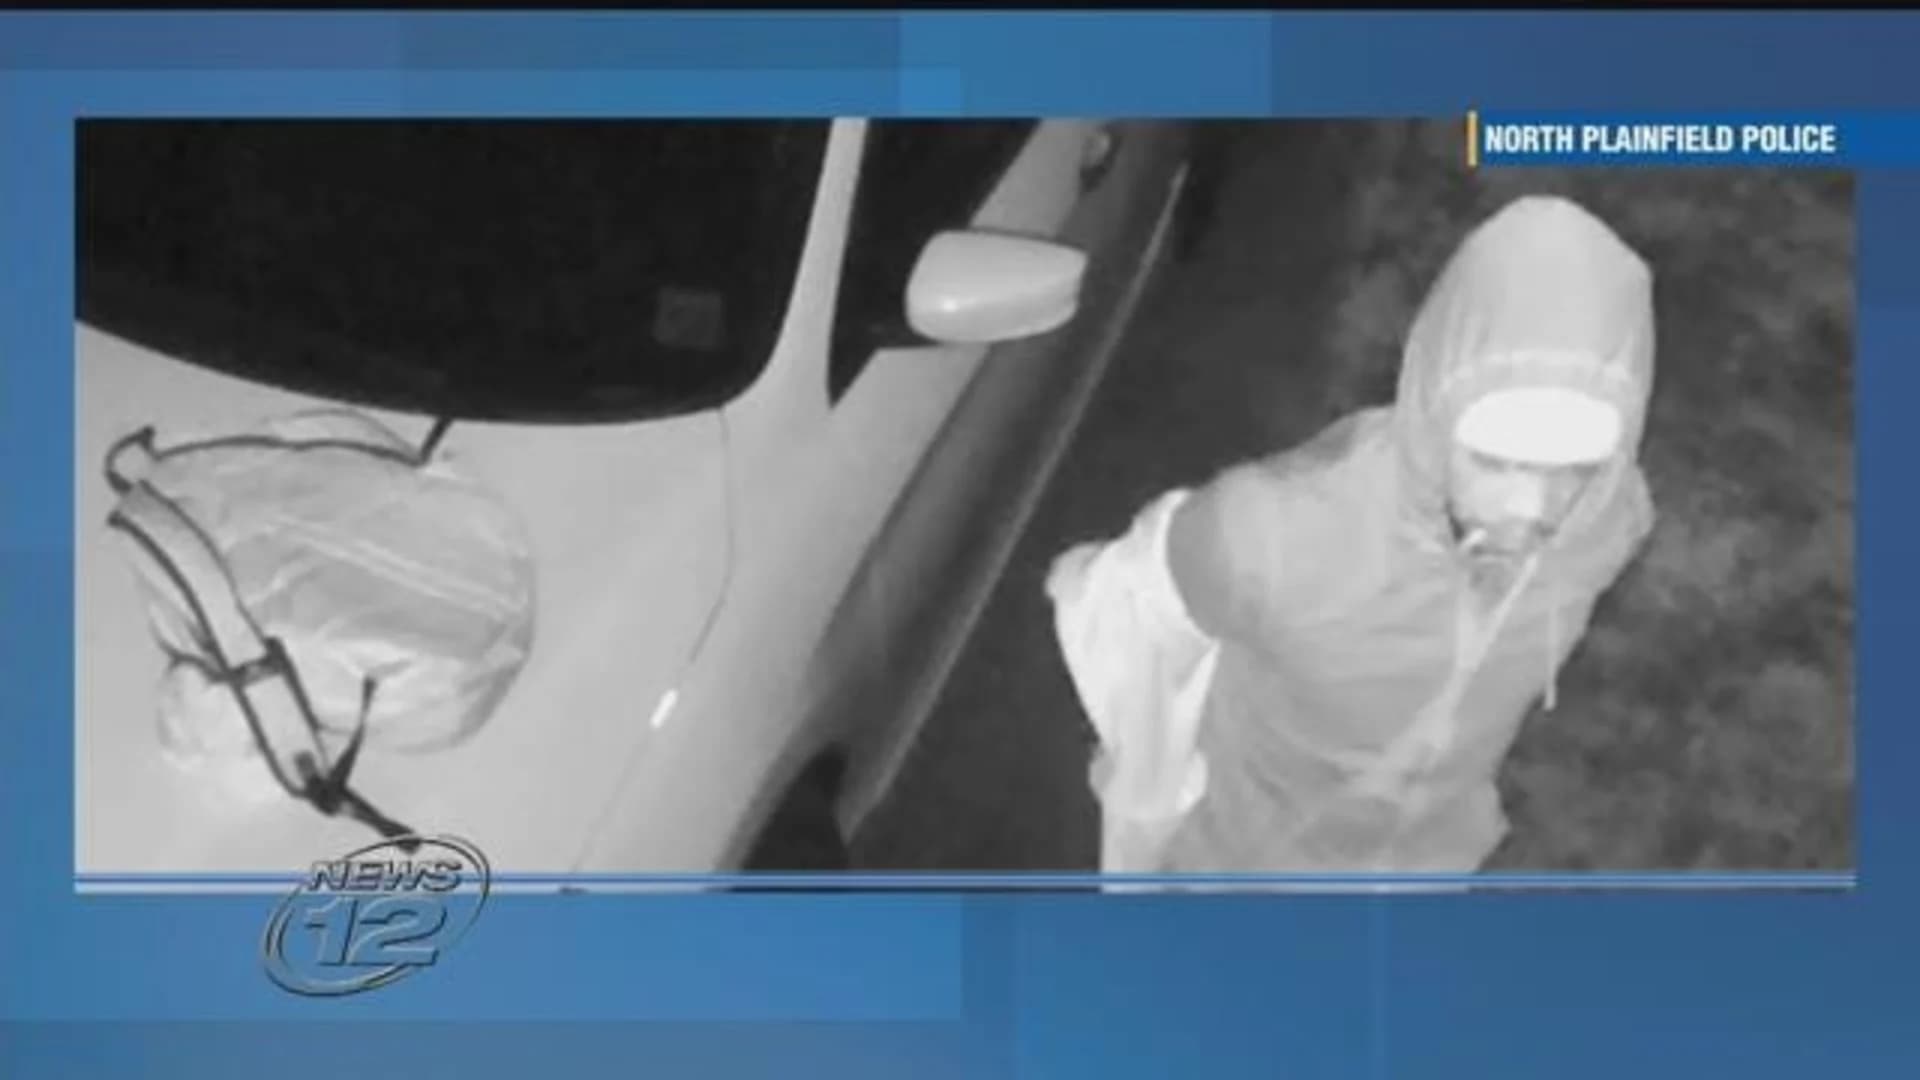 Man accused of defecating on driveway, breaking into car